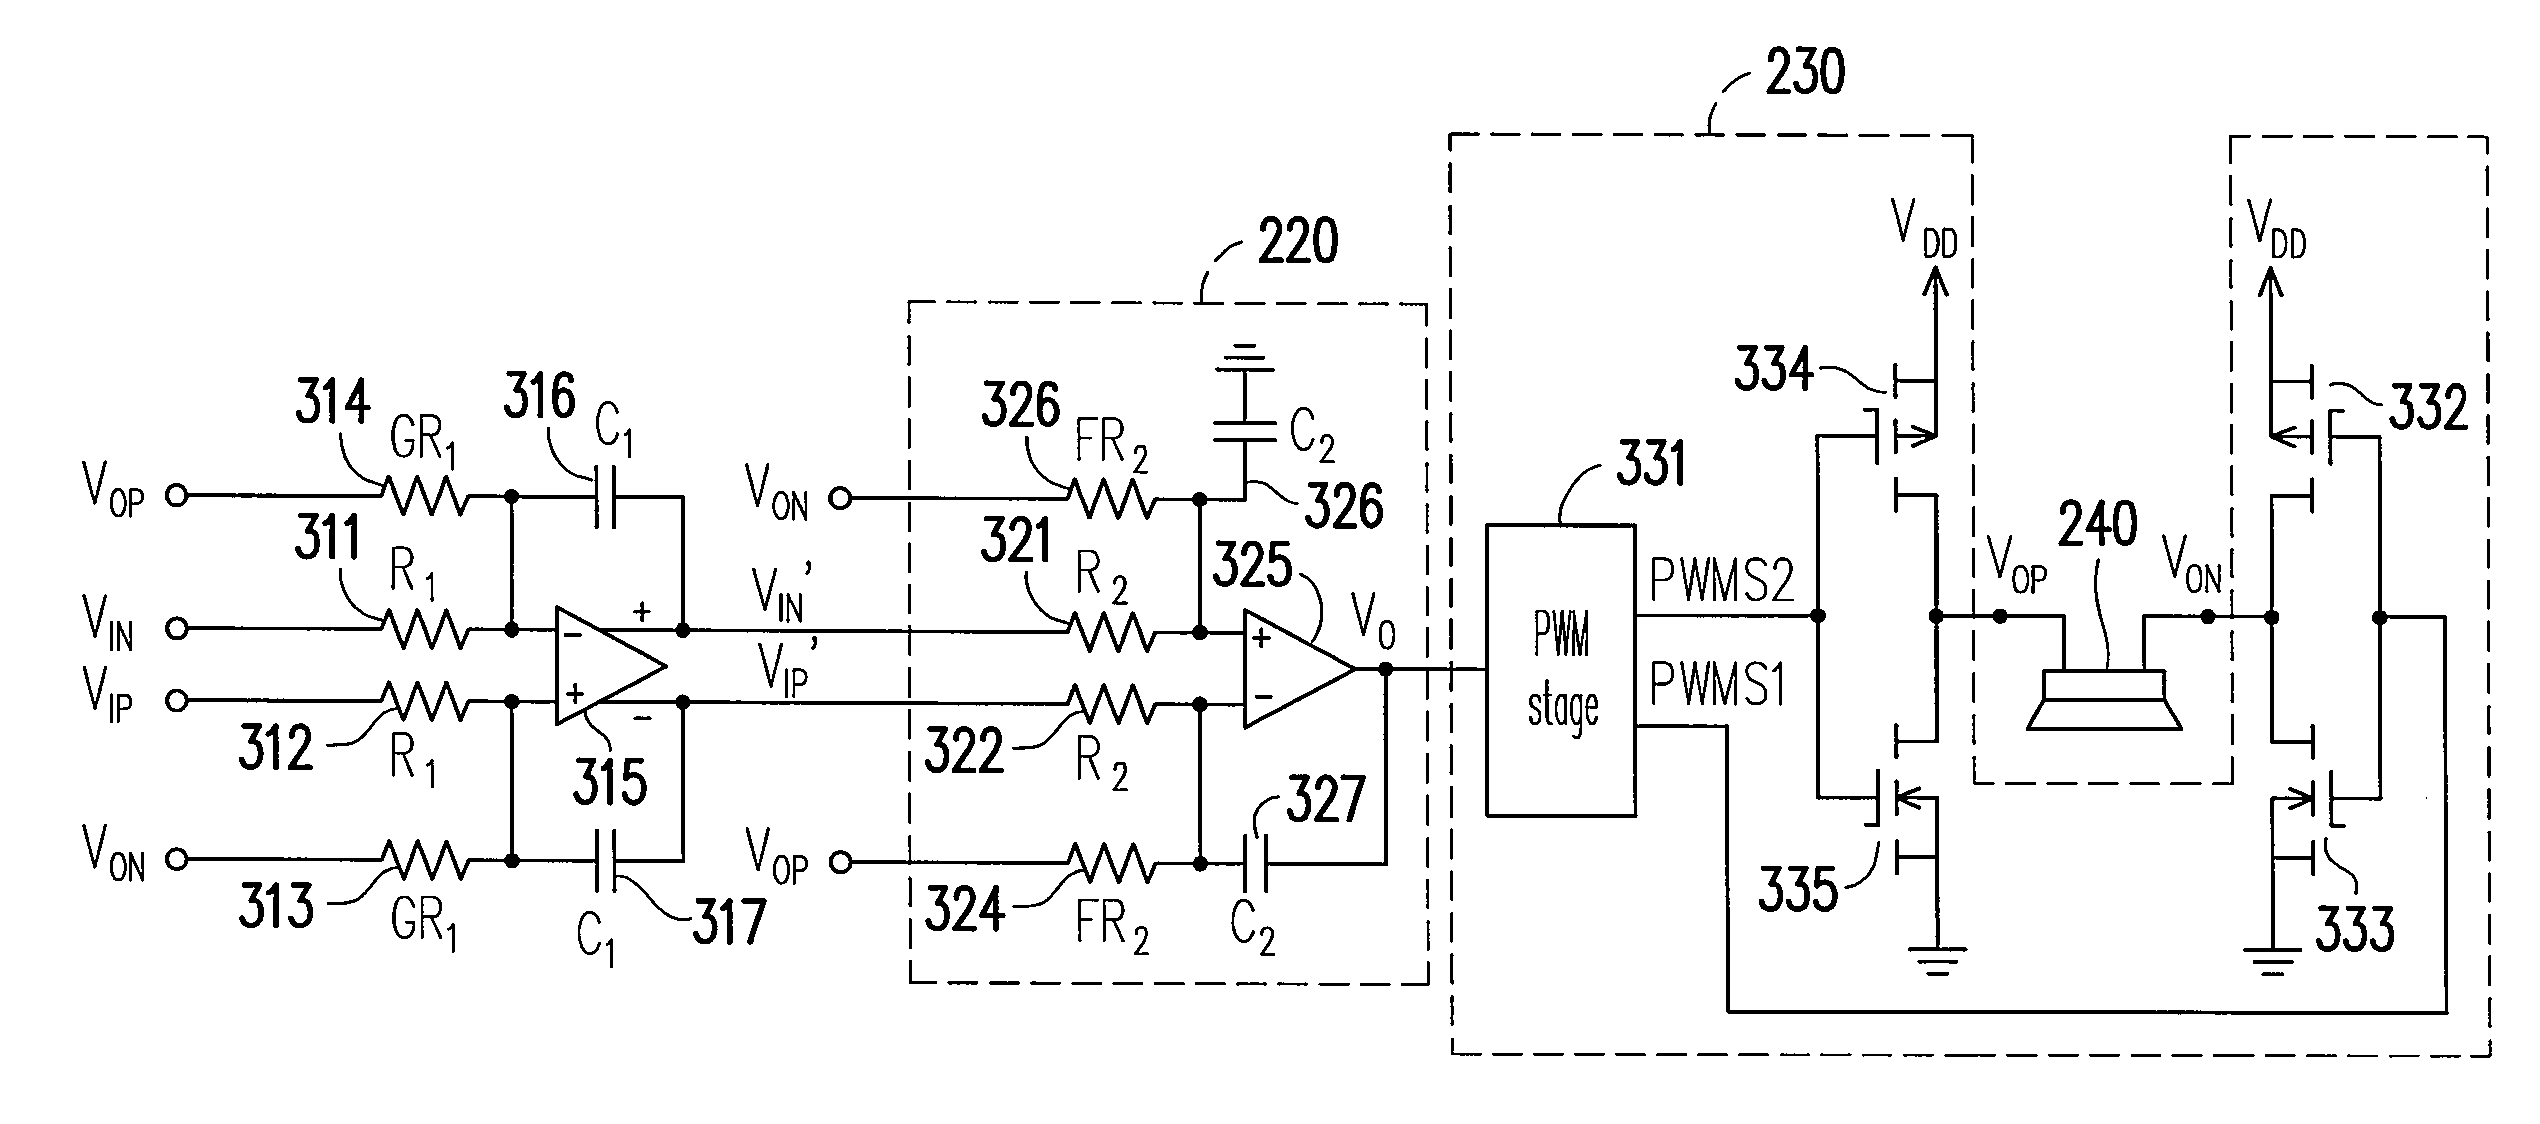 Power amplifier with noise shaping function